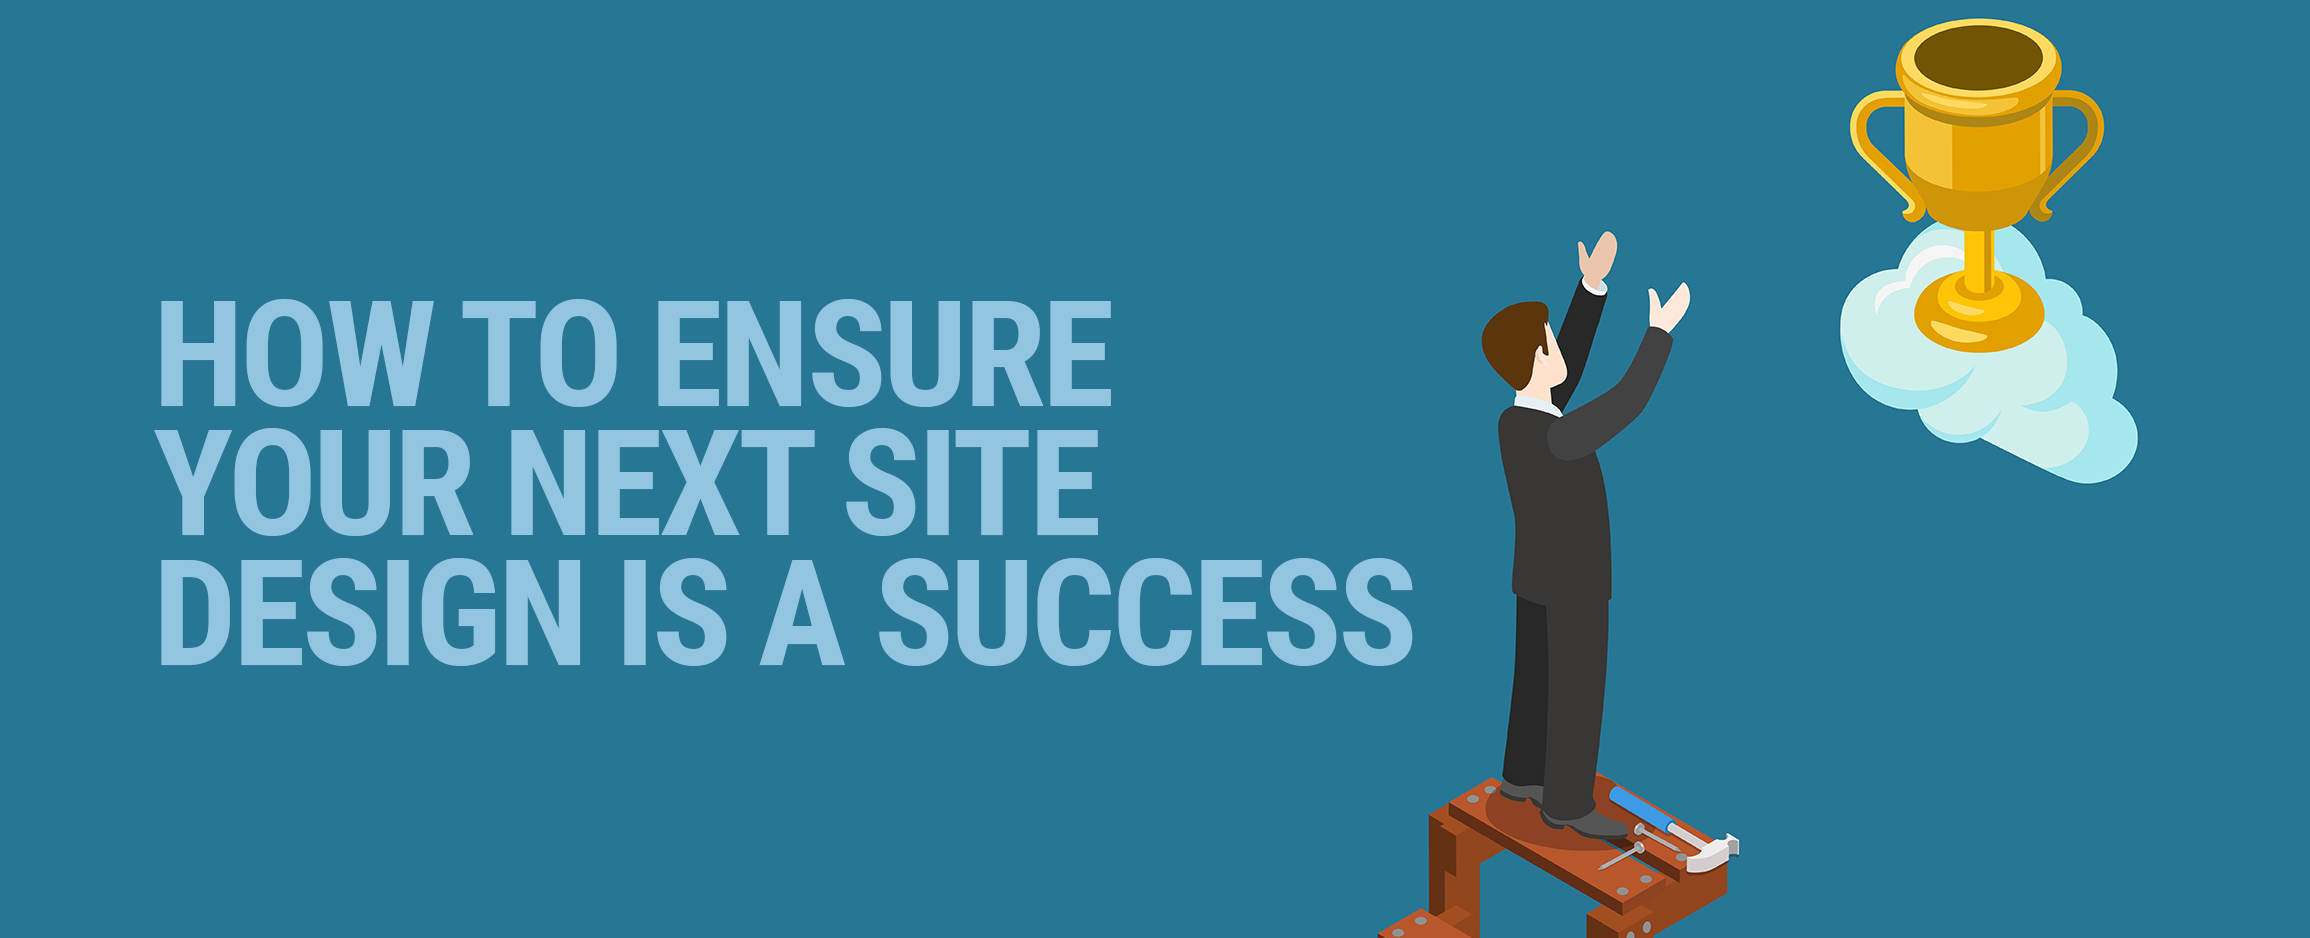 How To Ensure Your Next Site Design Is A Success